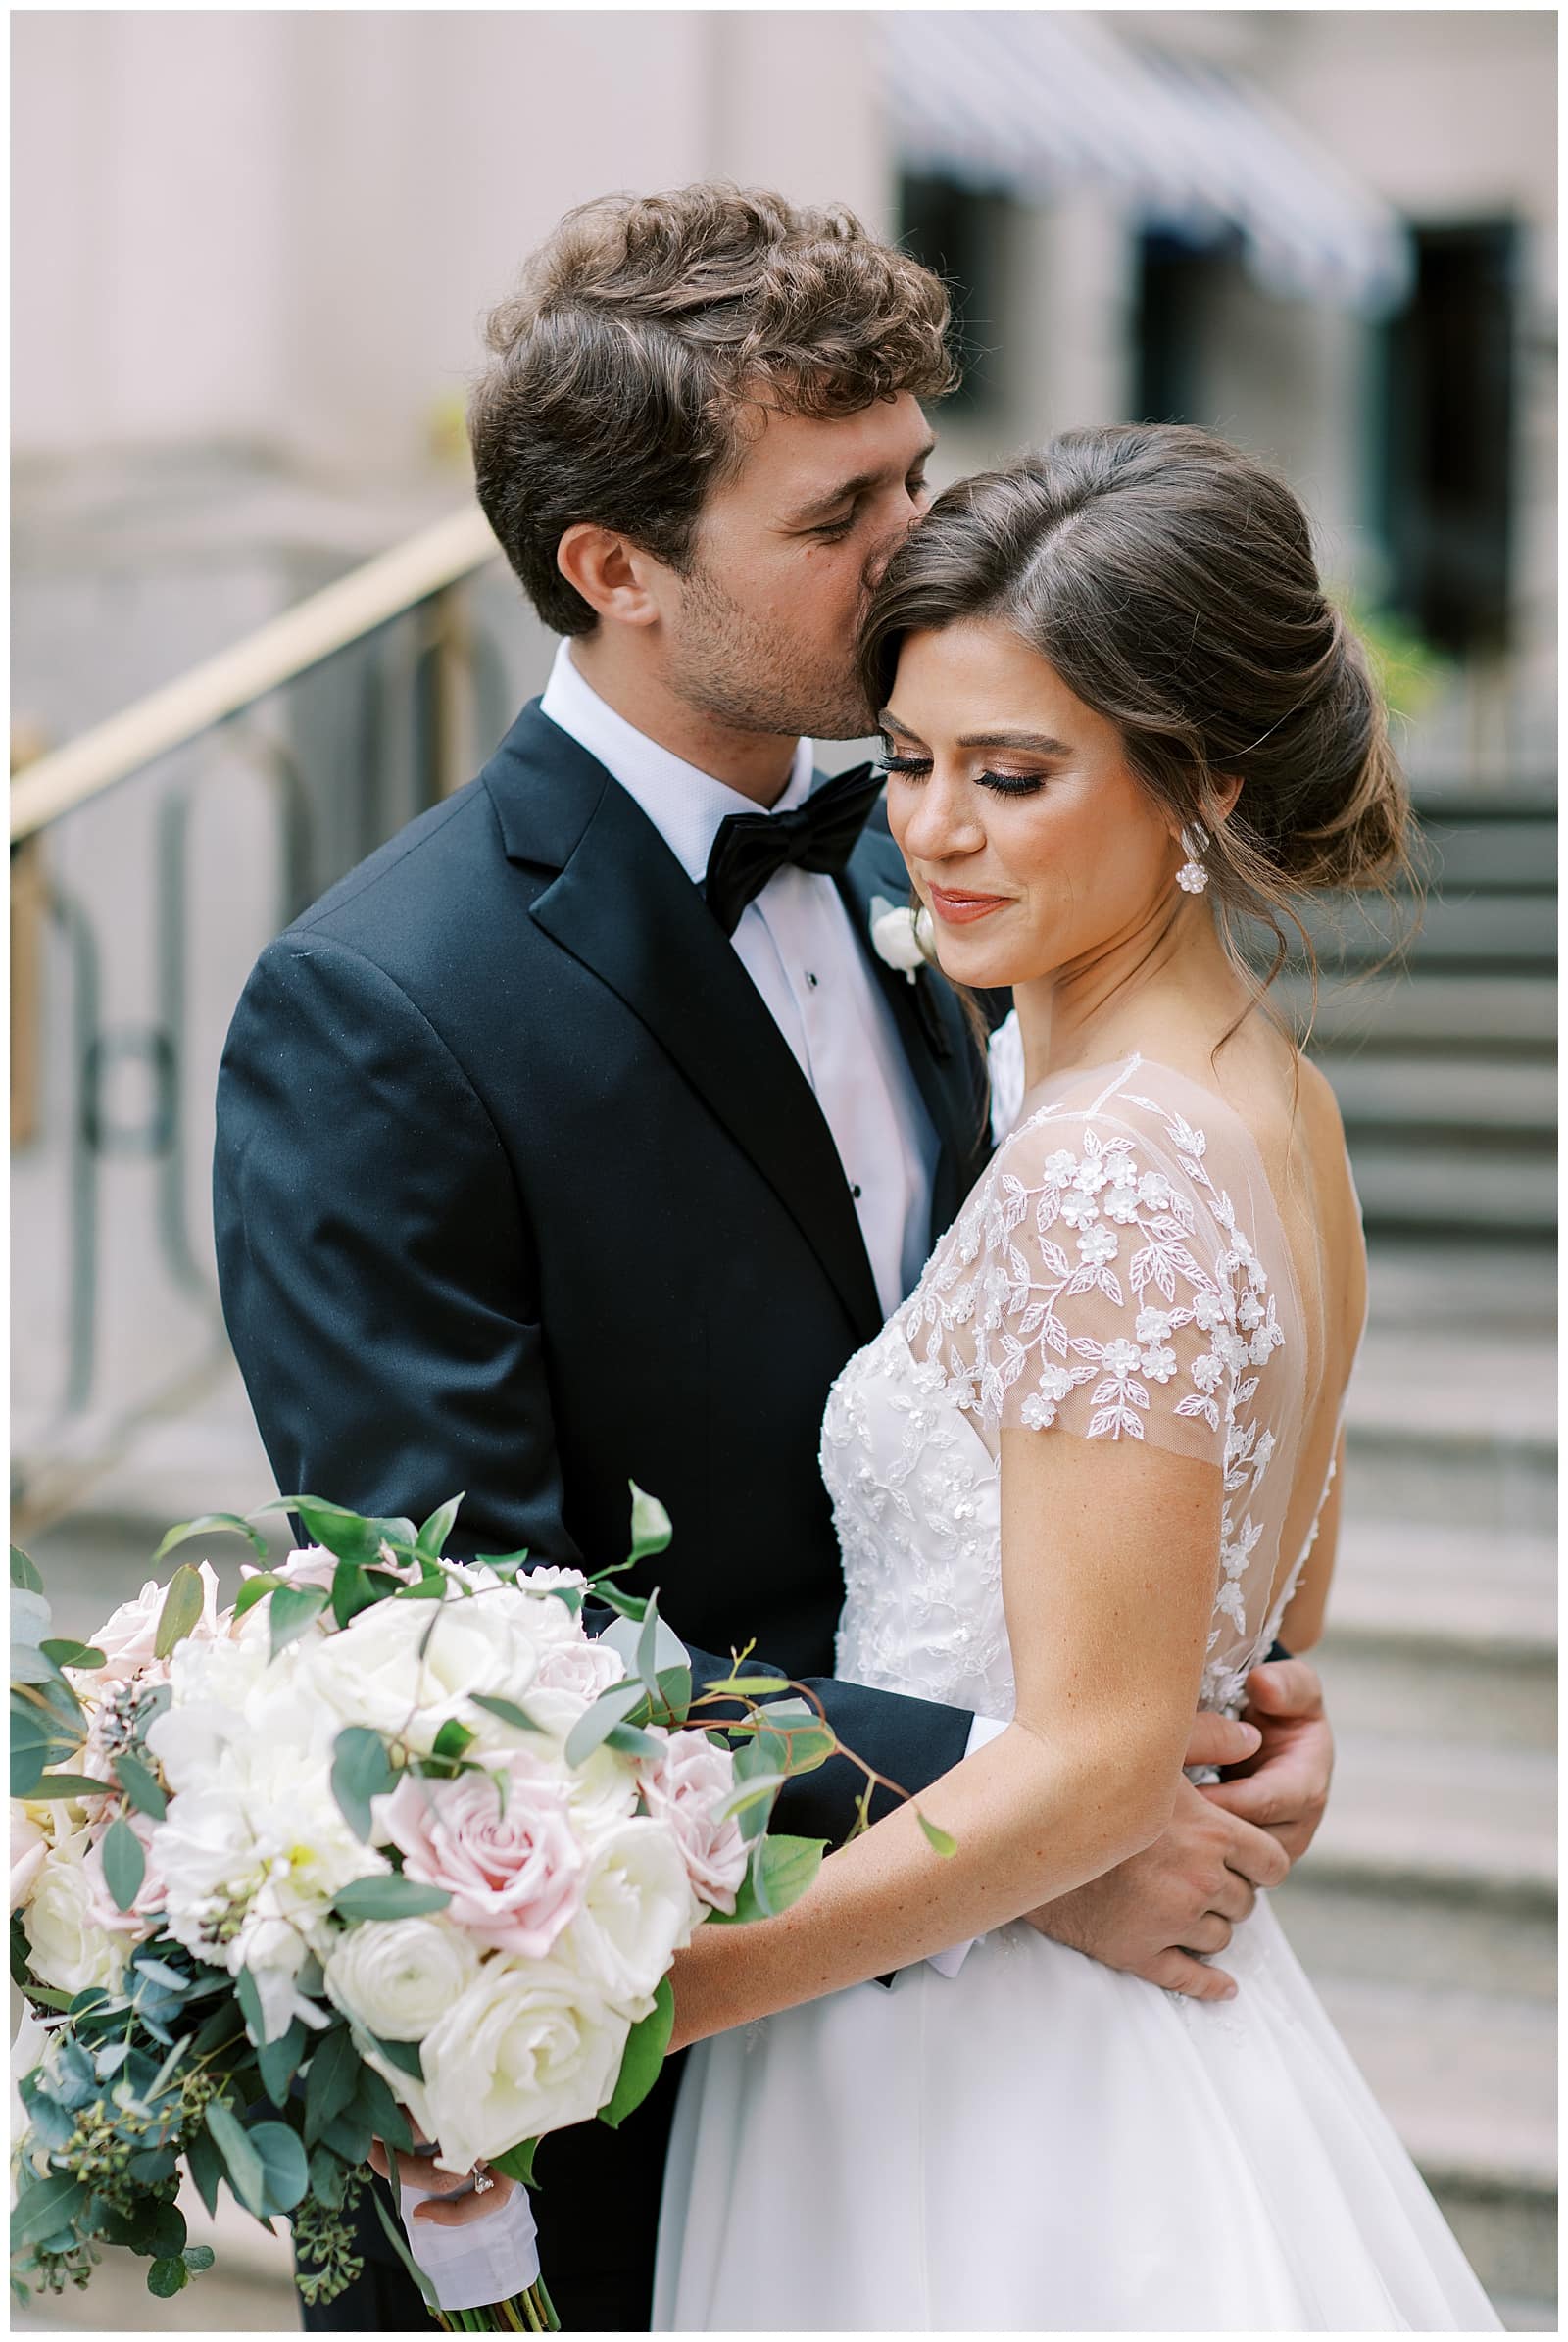 A young man with brown hair in a black bow tie and tuxedo is embracing a young brown haired woman in a white wedding gown on the steps of the Willard Hotel DC